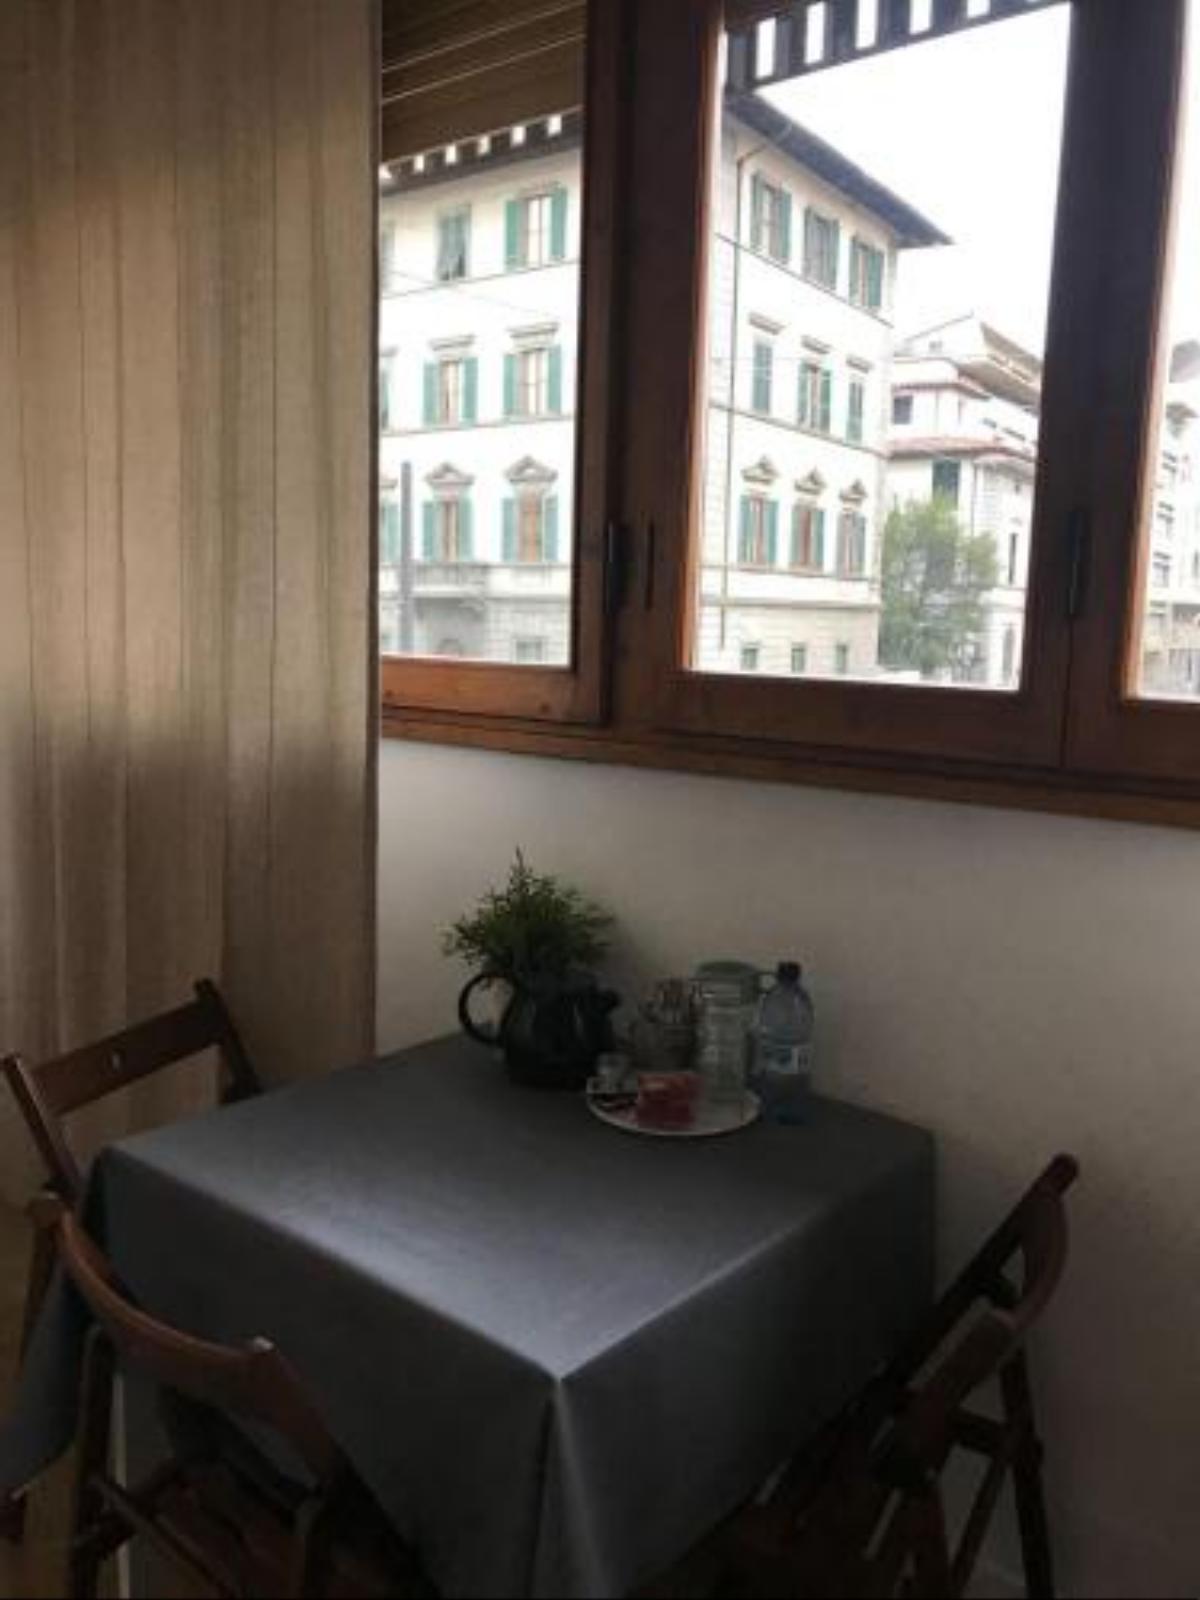 Guesthouse Amici Miei Hotel Florence Italy